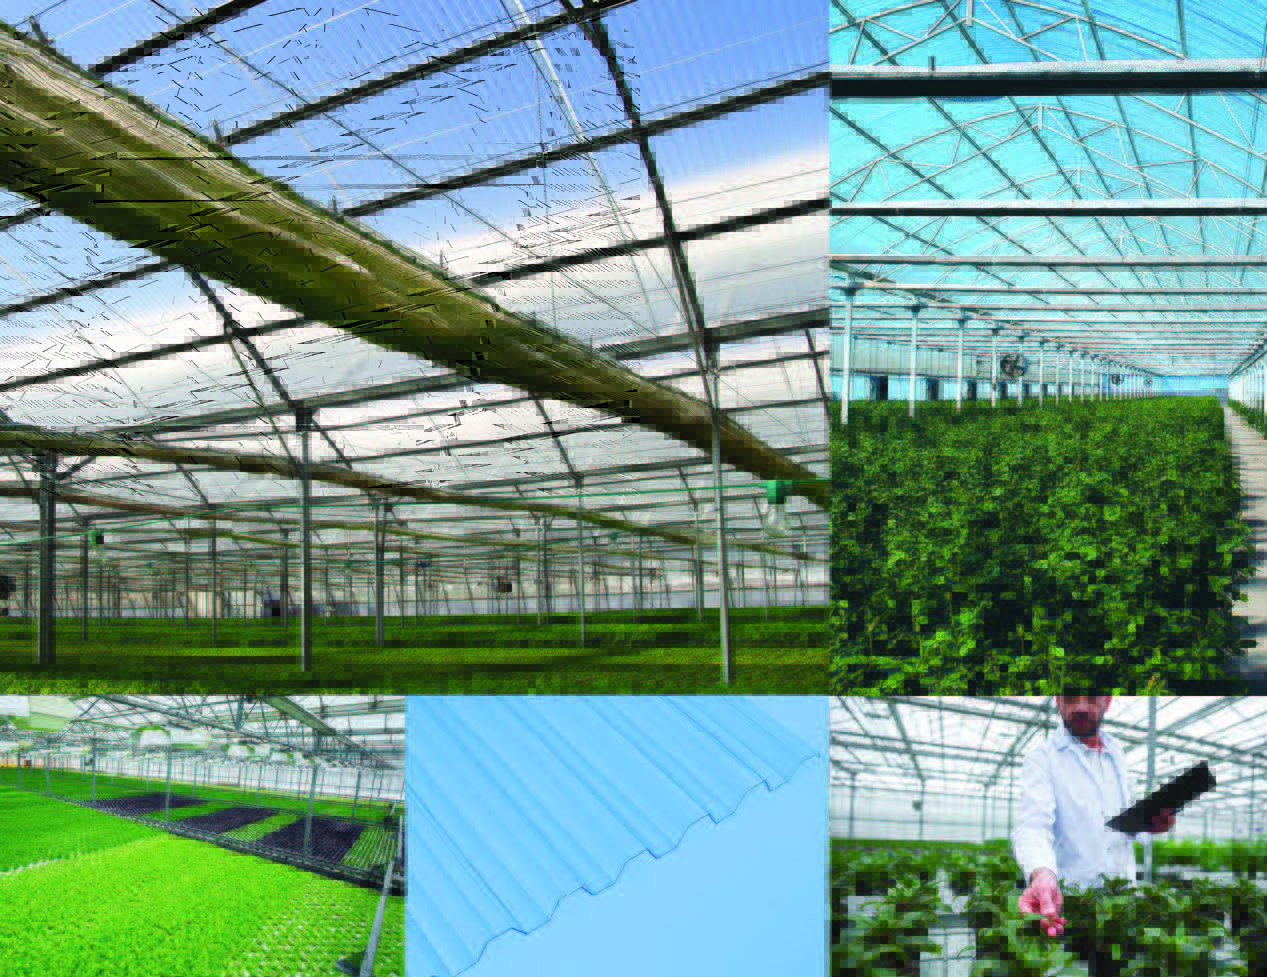 Choosing the Right Greenhouse Covering to Maximize DLI